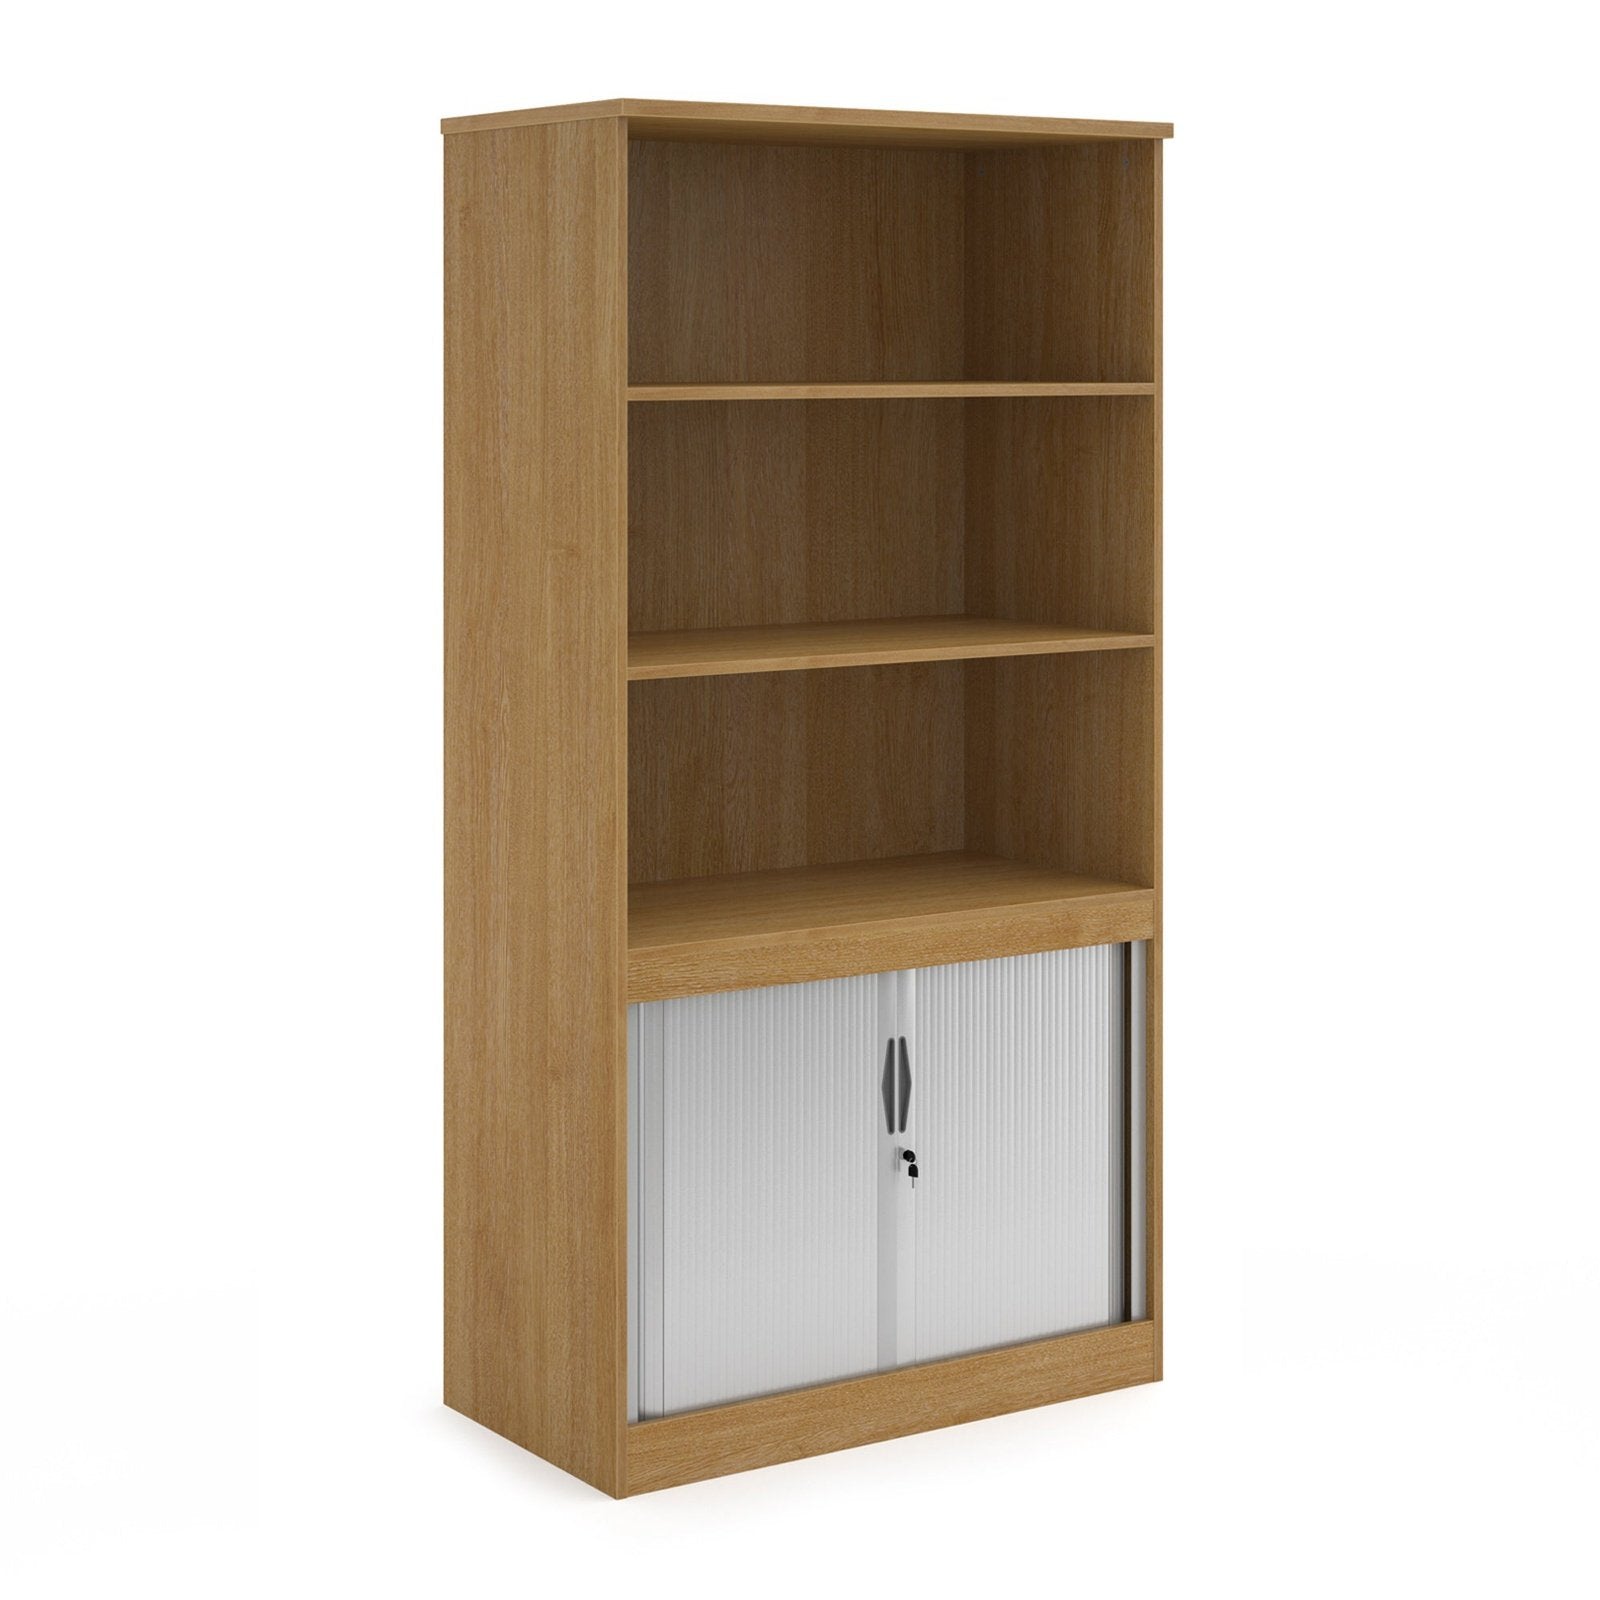 Systems combination unit with tambour doors and open top - Office Products Online